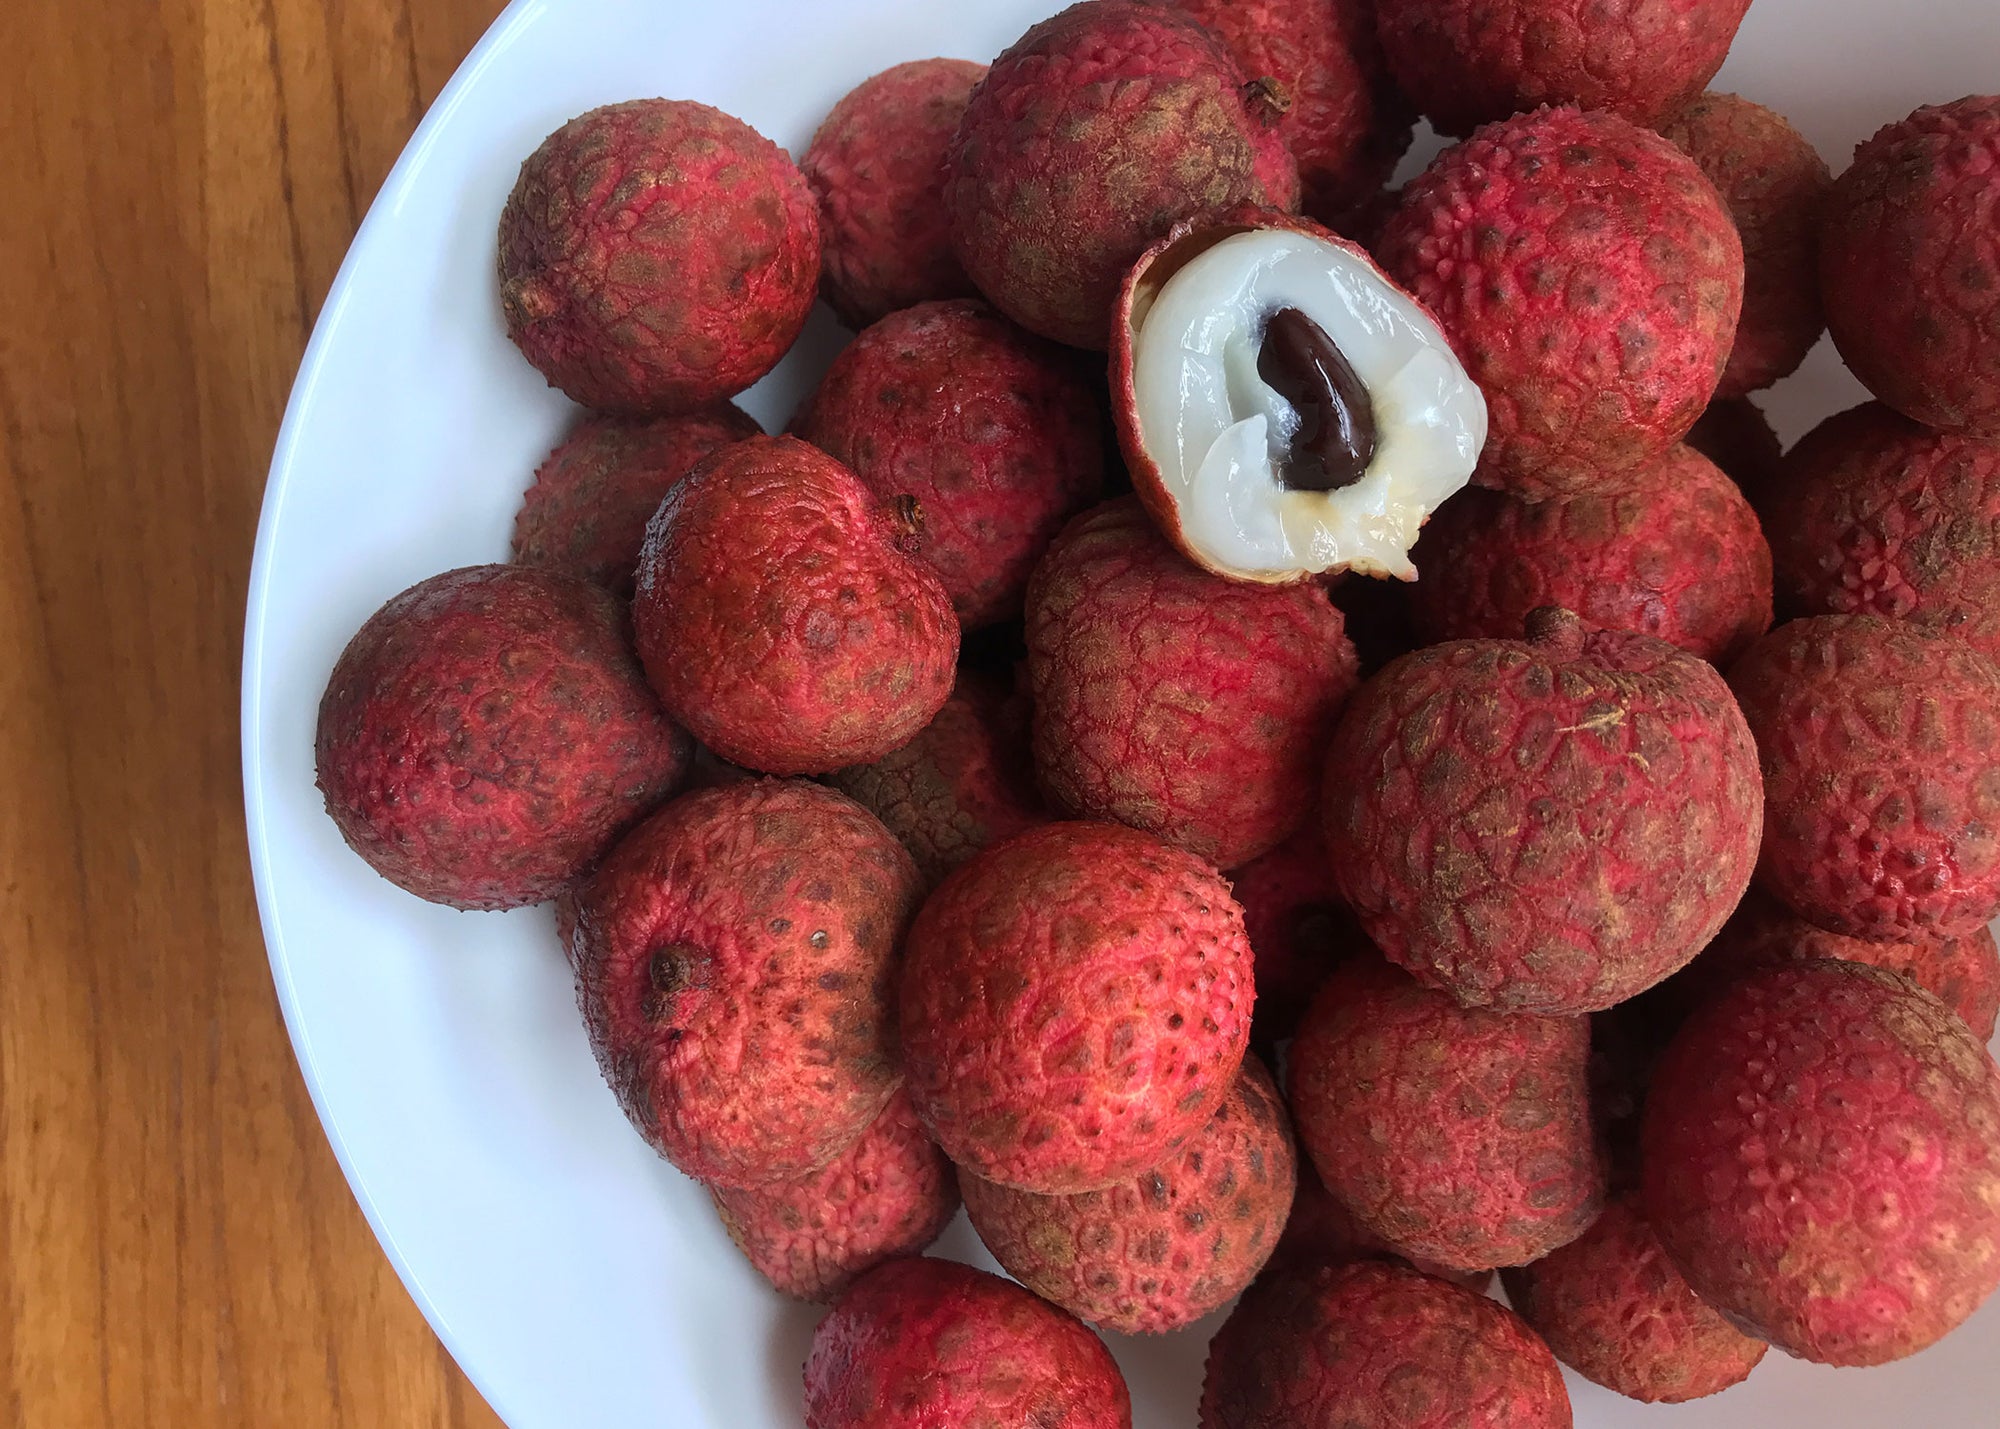 Fresh kaimana lychee fruit from Hawaii. Image of lychee fruit in bowl with one fruit peeled open to show fruit flesh and seed.